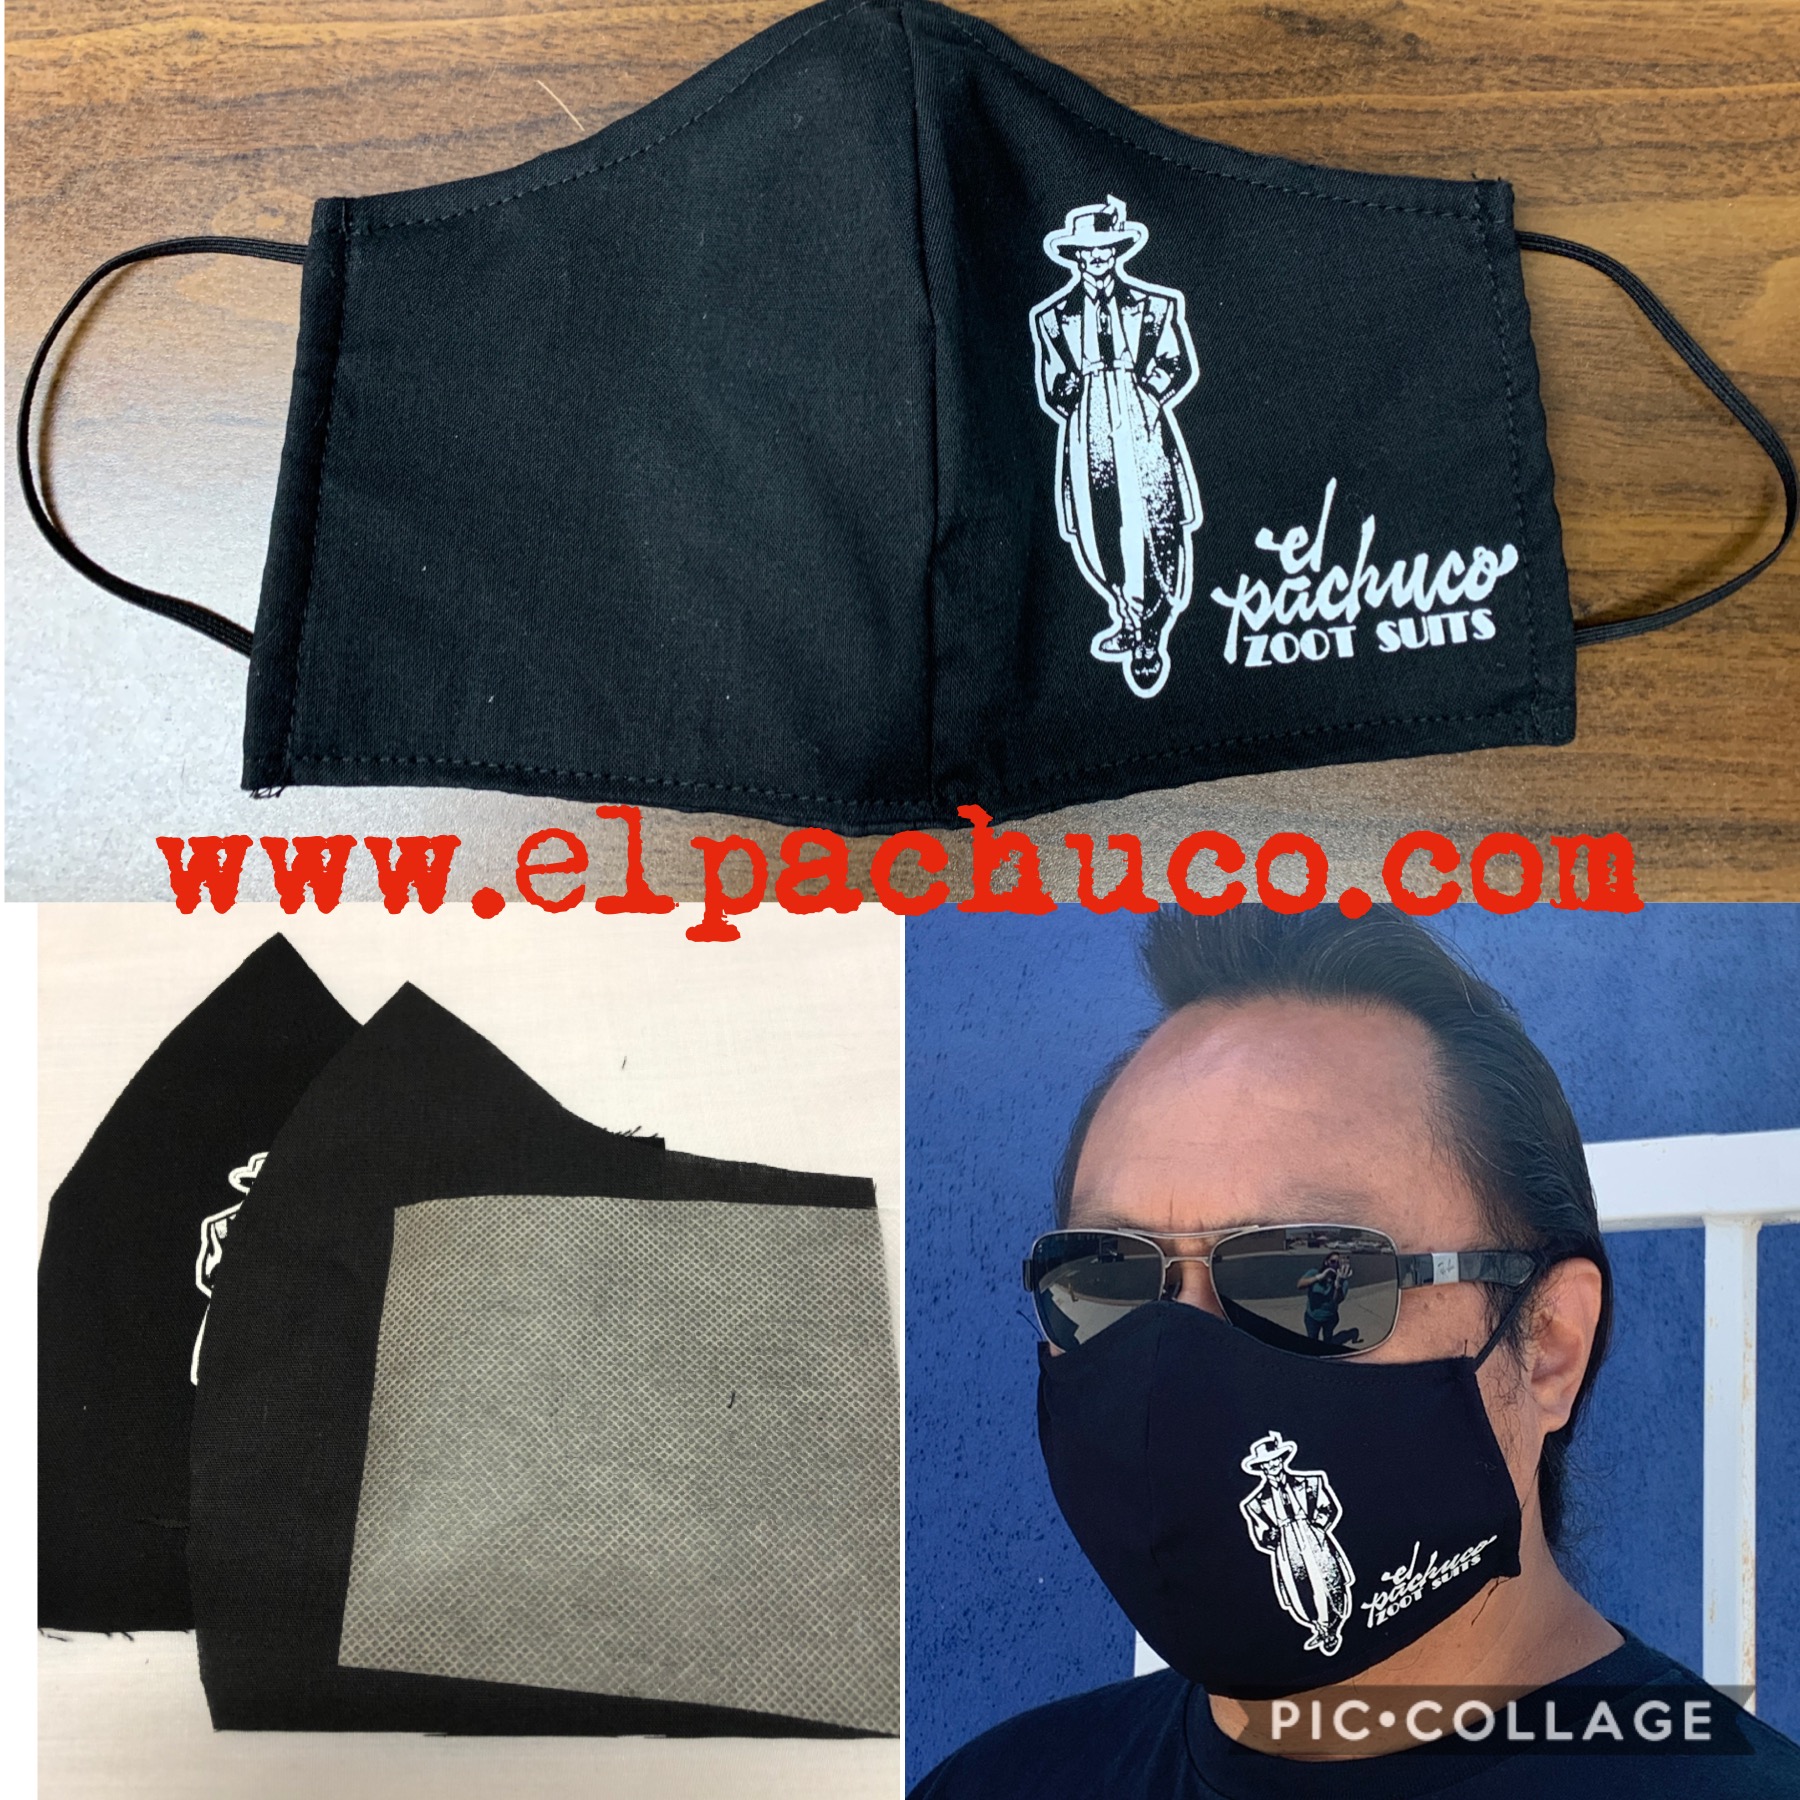 Hand Made Face Masks  El Pachuco Zoot Suits